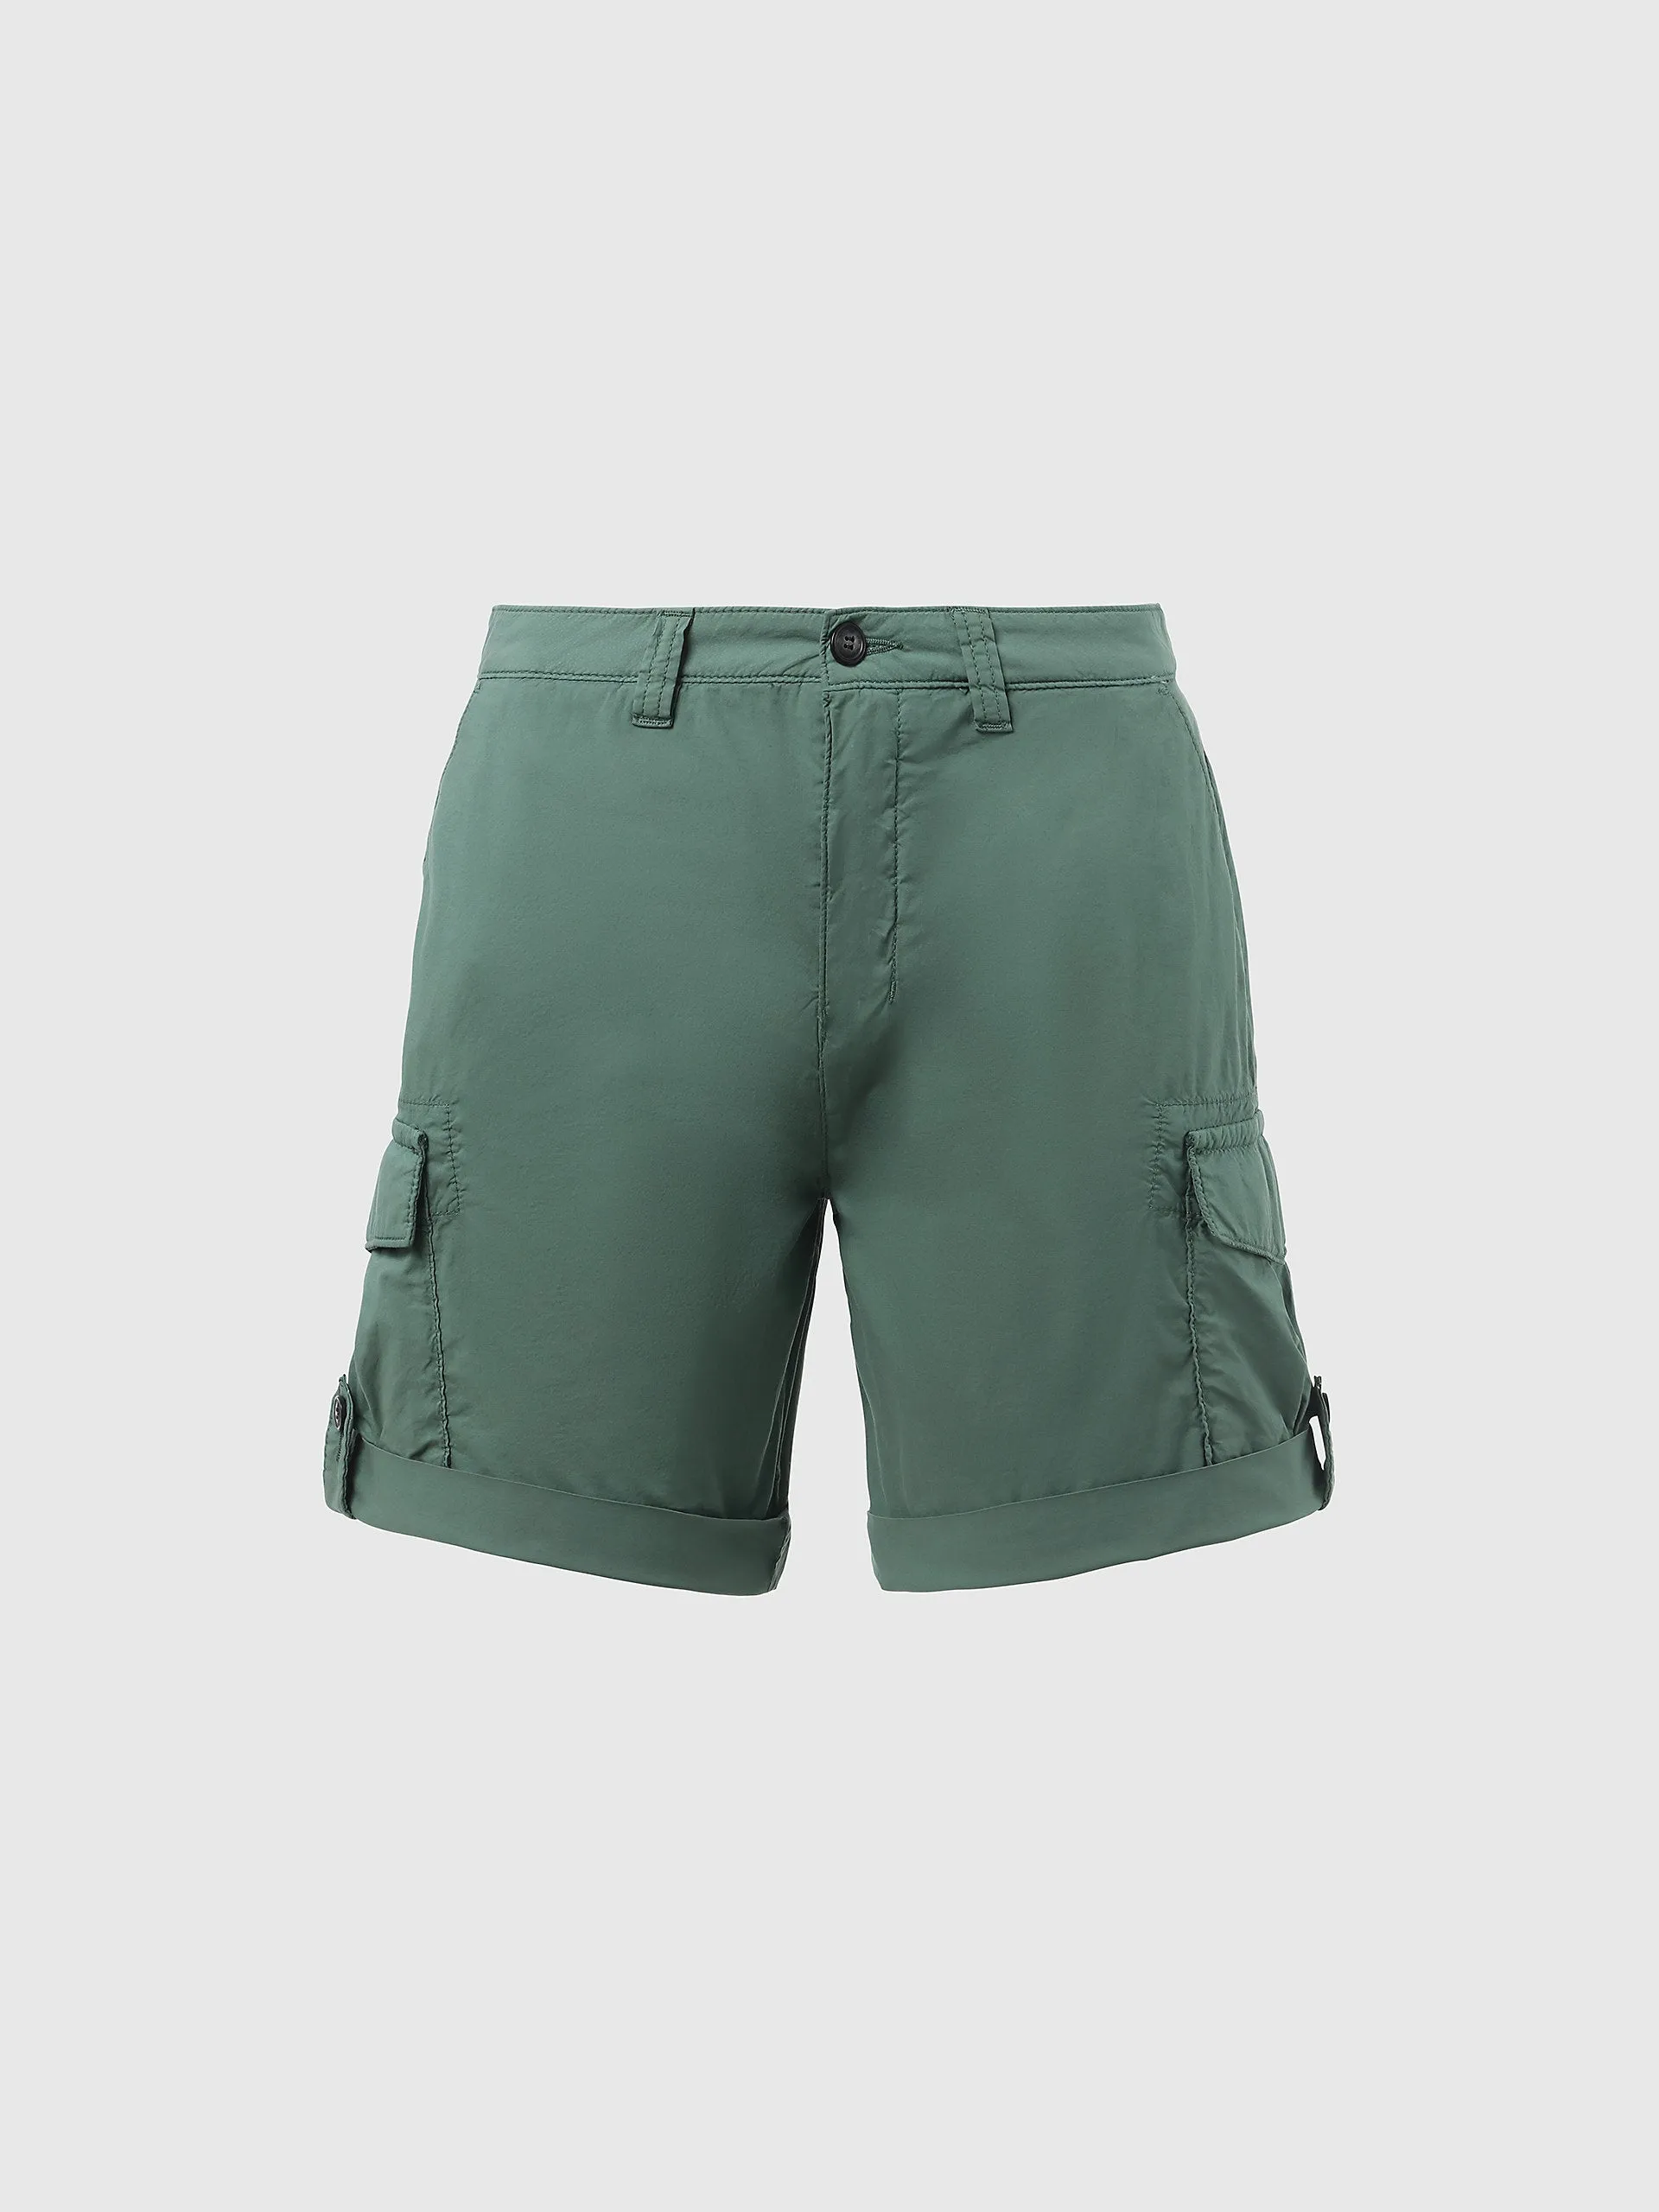  - Shorts cargo in cotoneMilitary green46